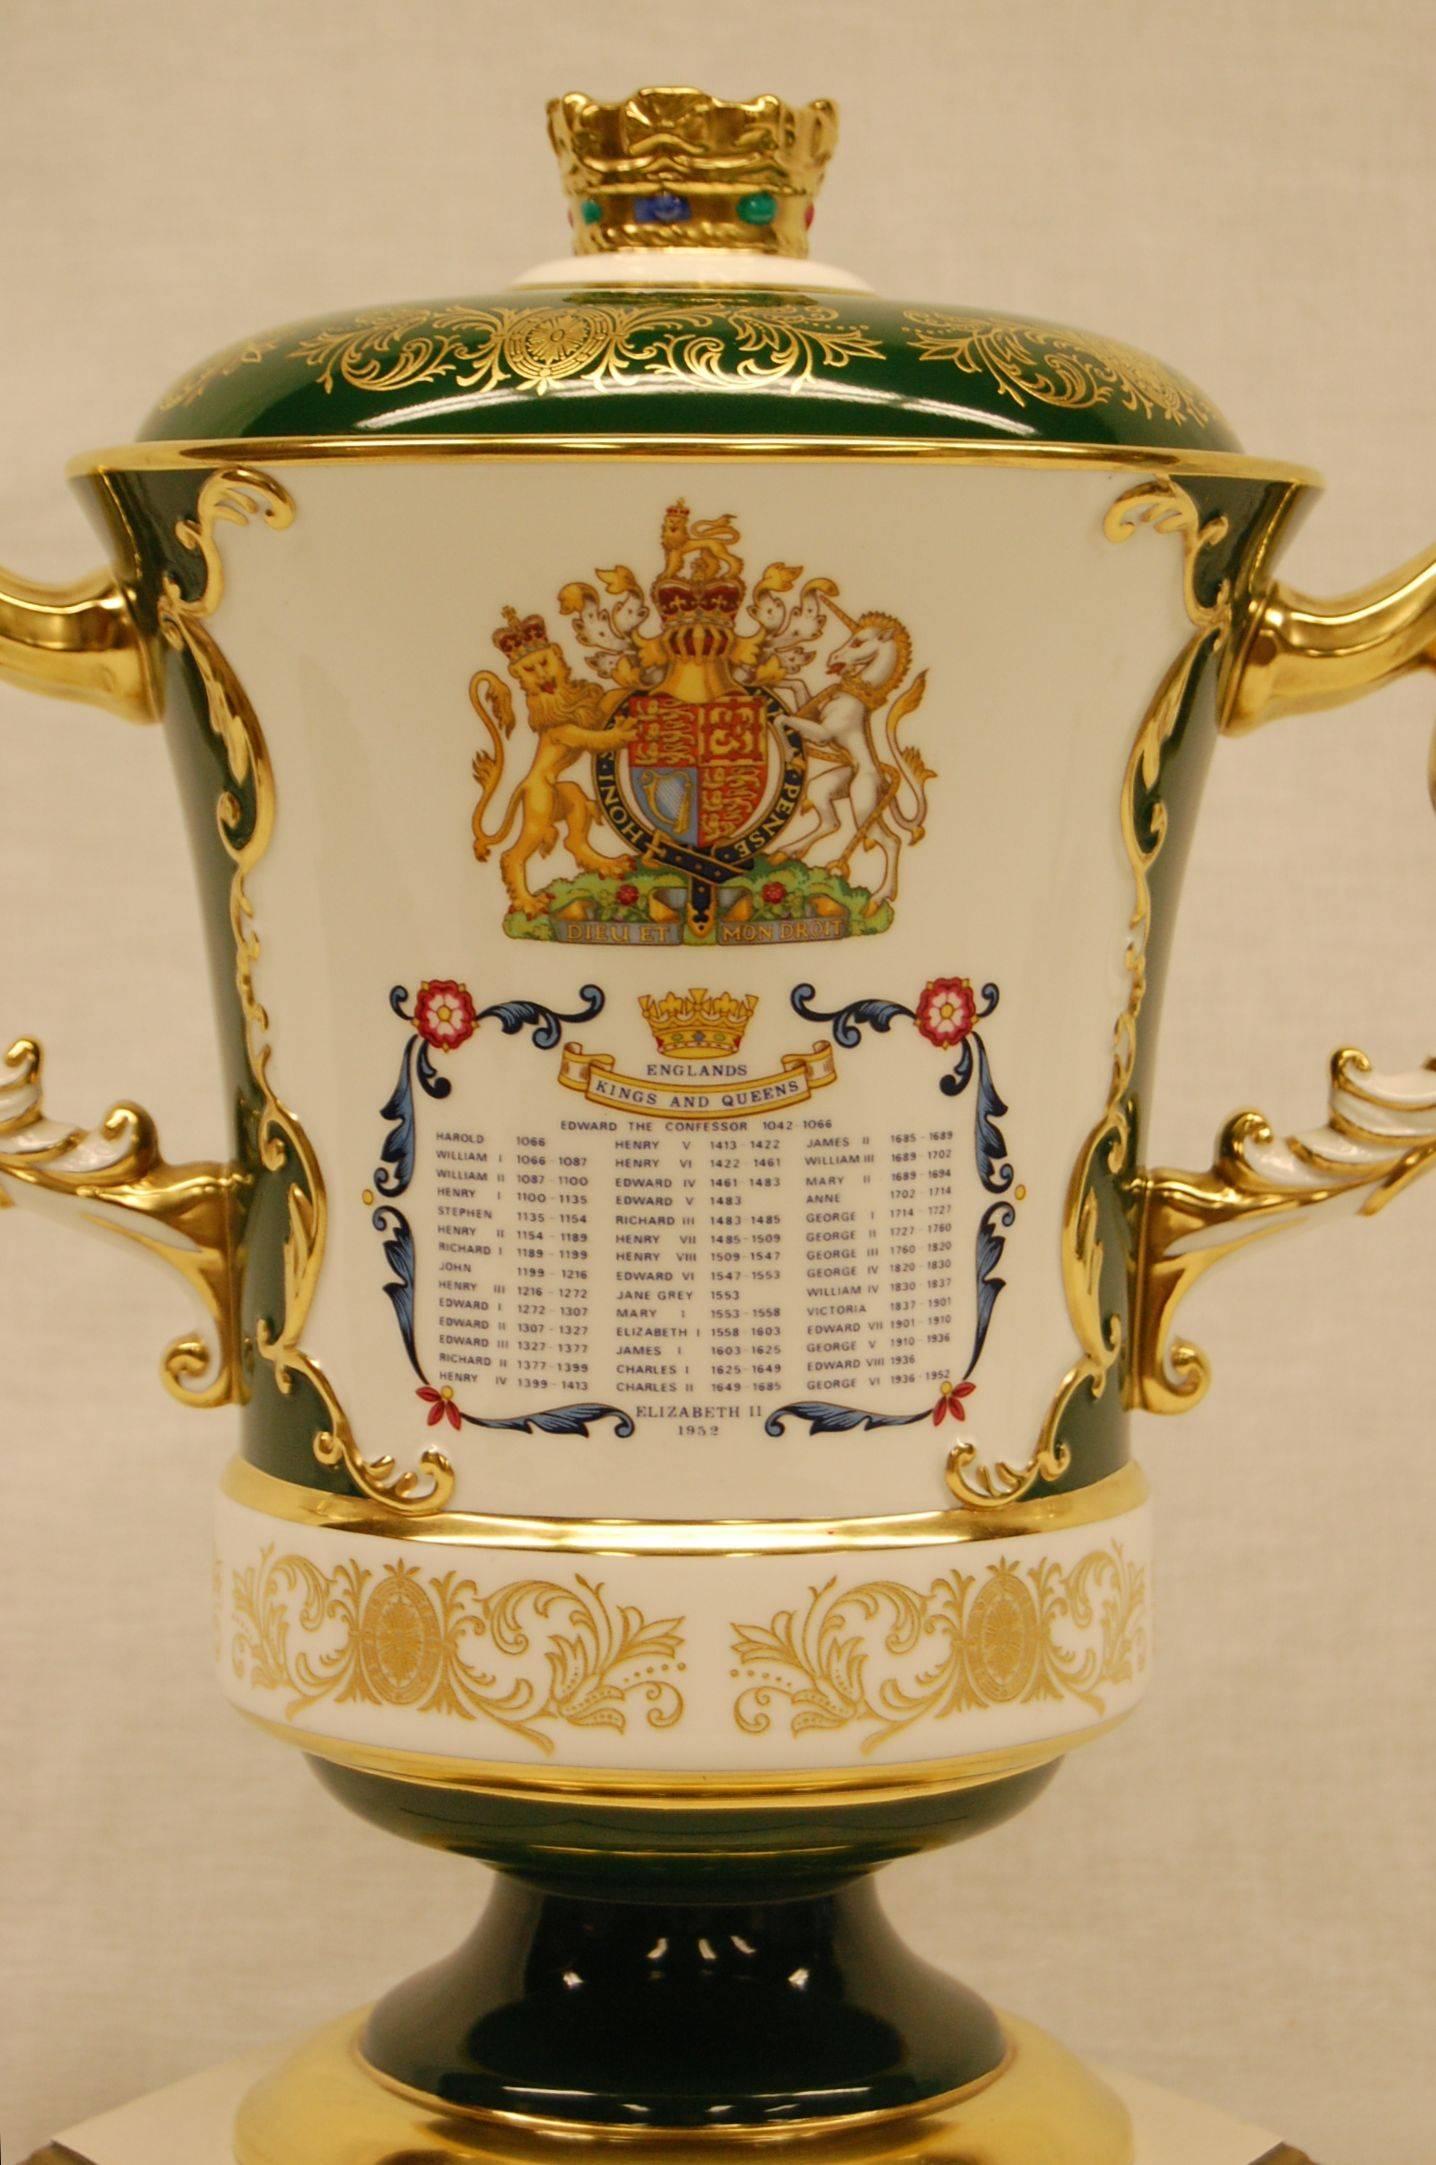 Neoclassical Porcelain Urn by Aynsley to Commemorate QE II Silver Jubilee, Buckingham Palace